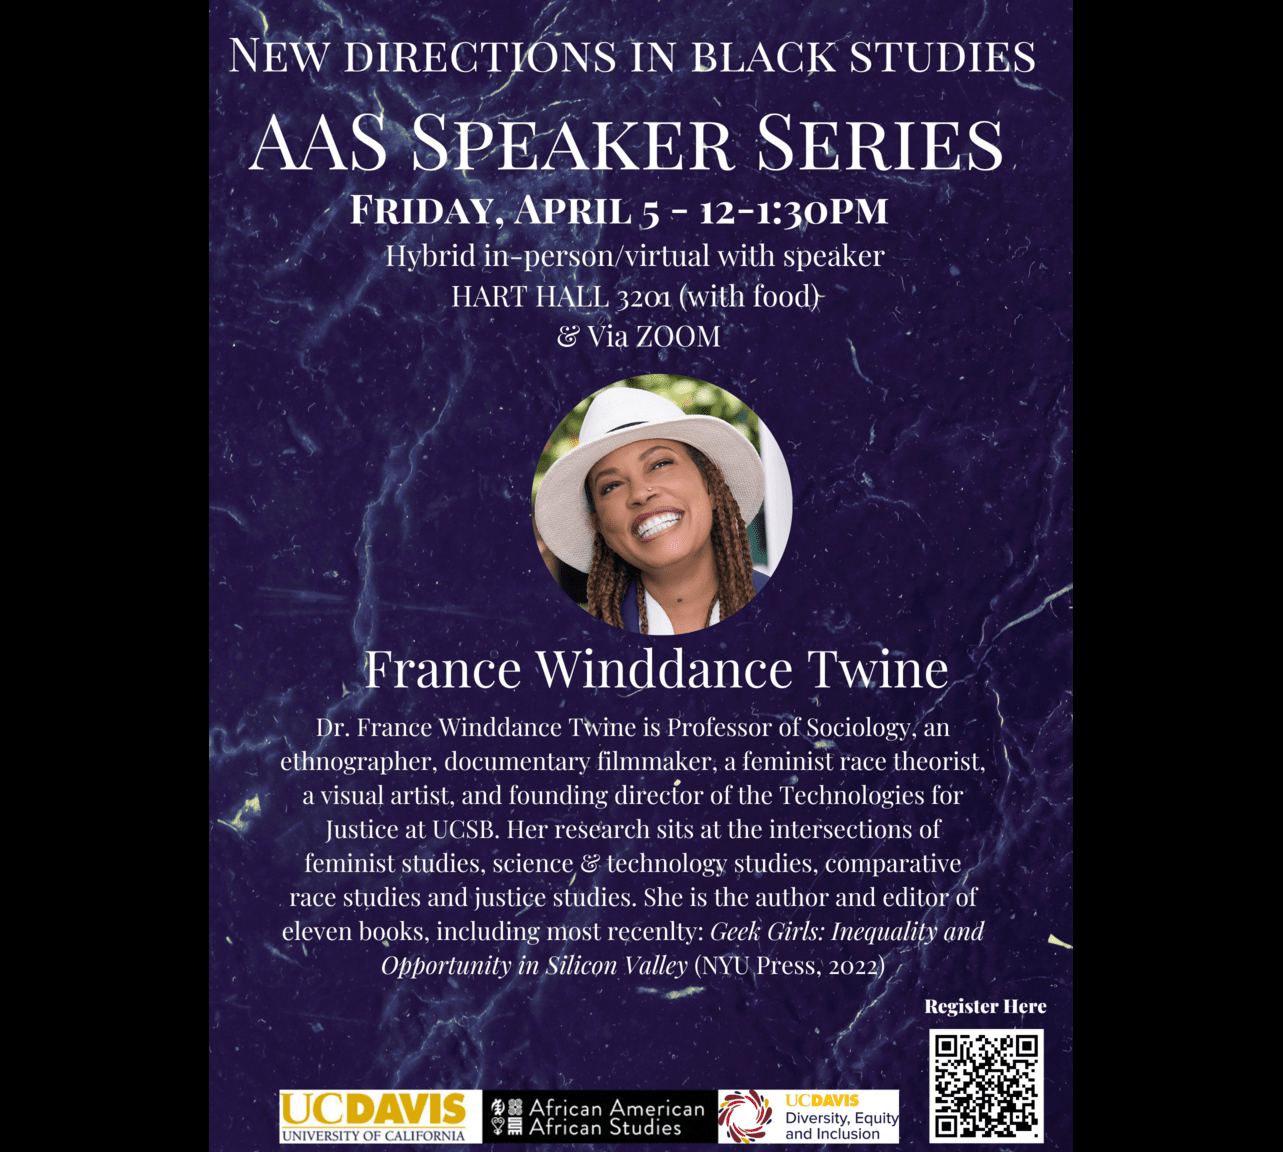 AAS Speaker Series with Dr. France Winddance Twine. AAS presents Dr. France Winddance Twine on Friday, April 5 @ 12pm in Hart Hall 3201.  Dr. France Winddance Twine is an ethnographer, documentary filmmaker, a feminist race theorist and a visual artist.